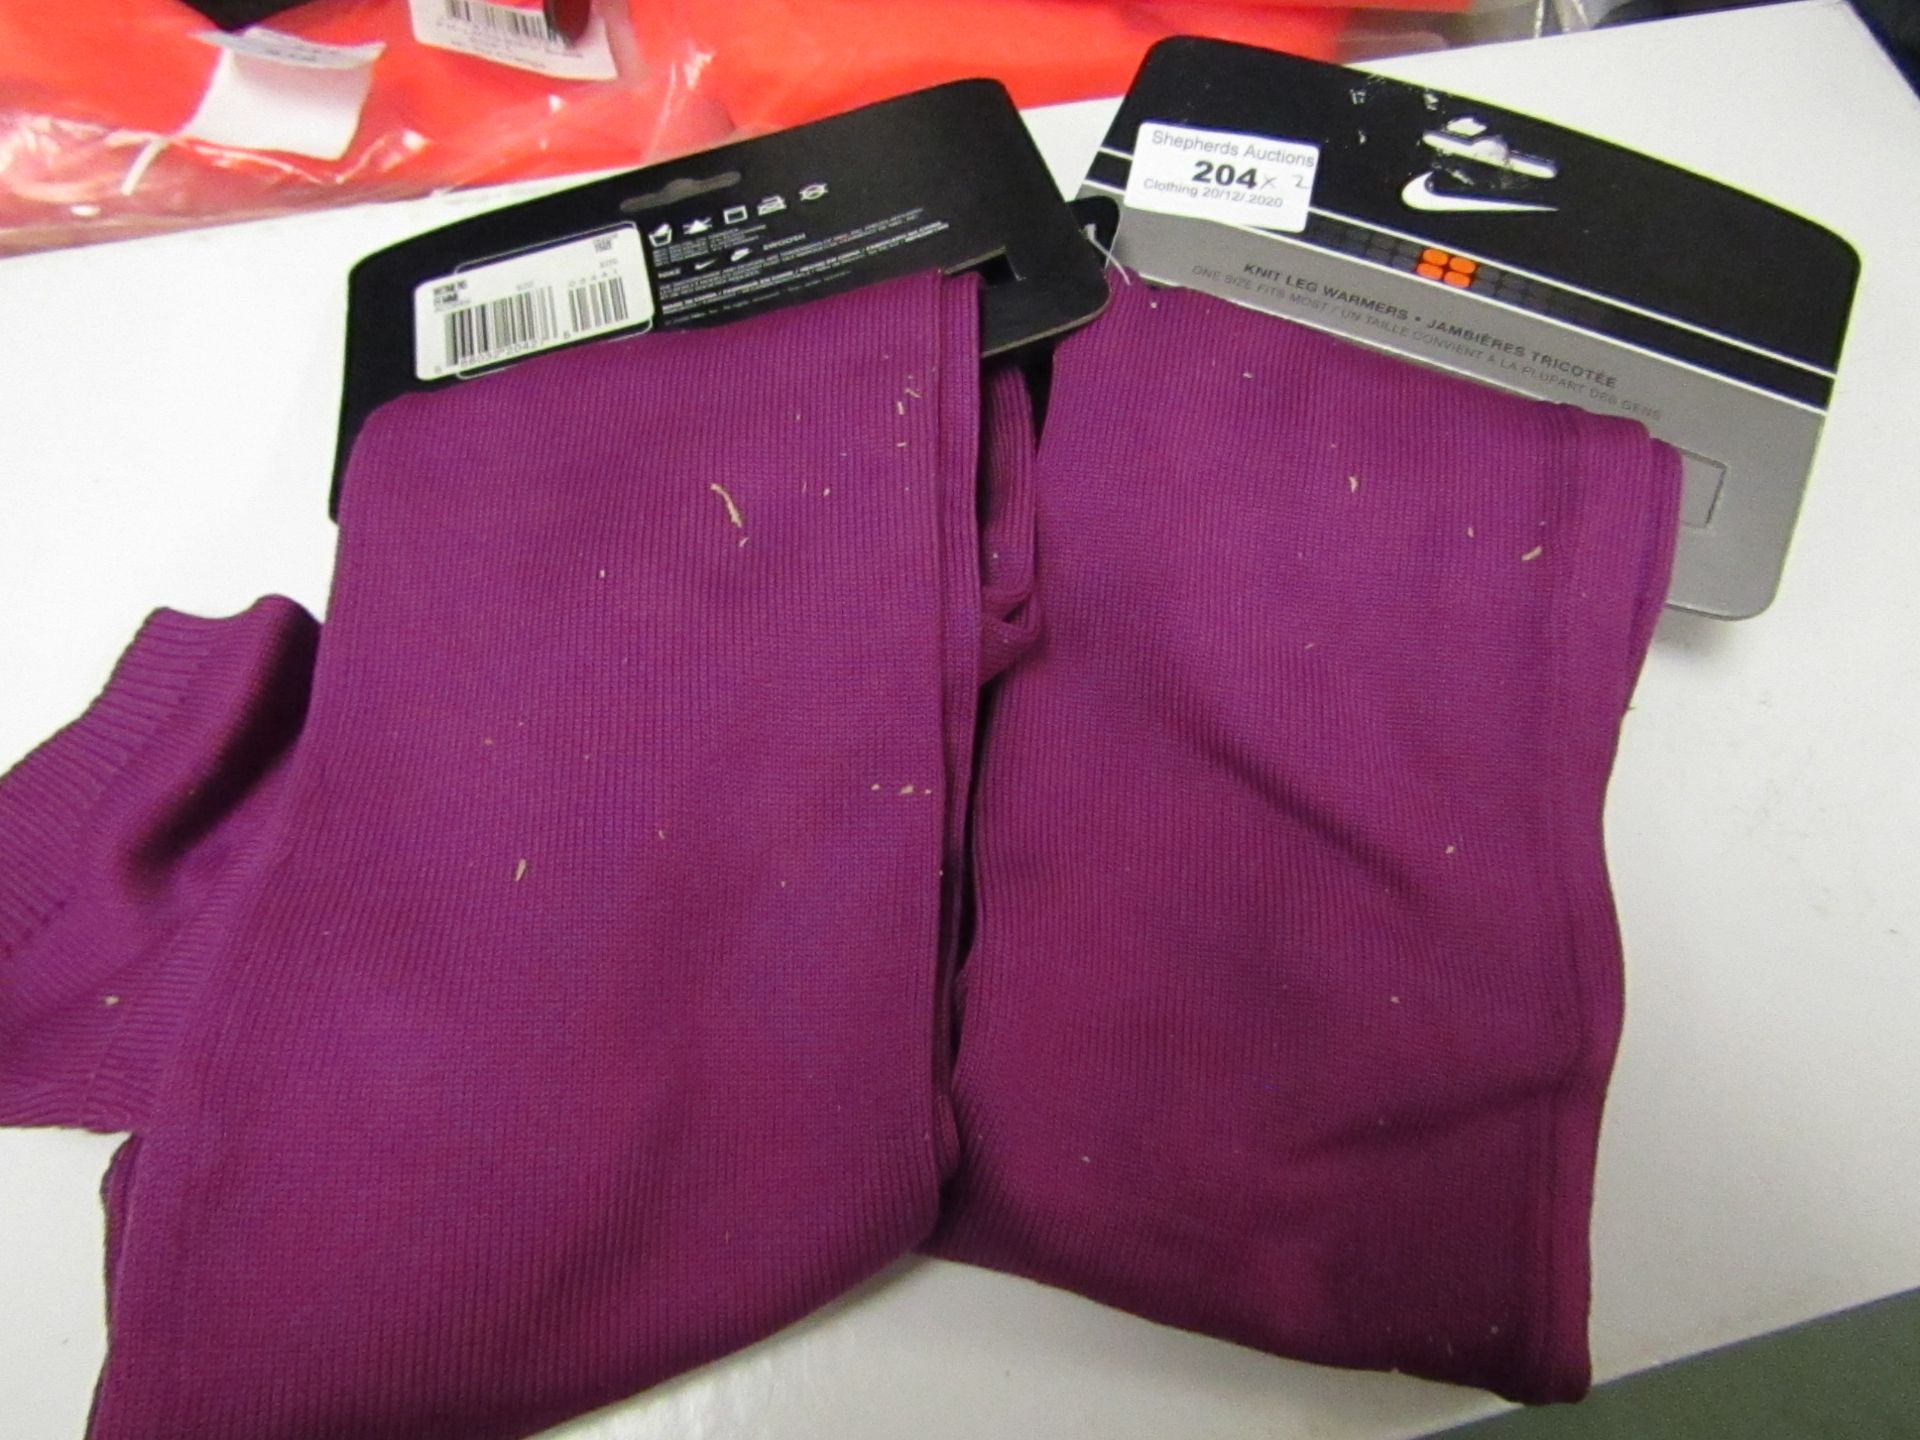 2 X Nike Knit Leg Warmers Ladies ( Appear to Have Bits Cardboard stuck to them but will come off